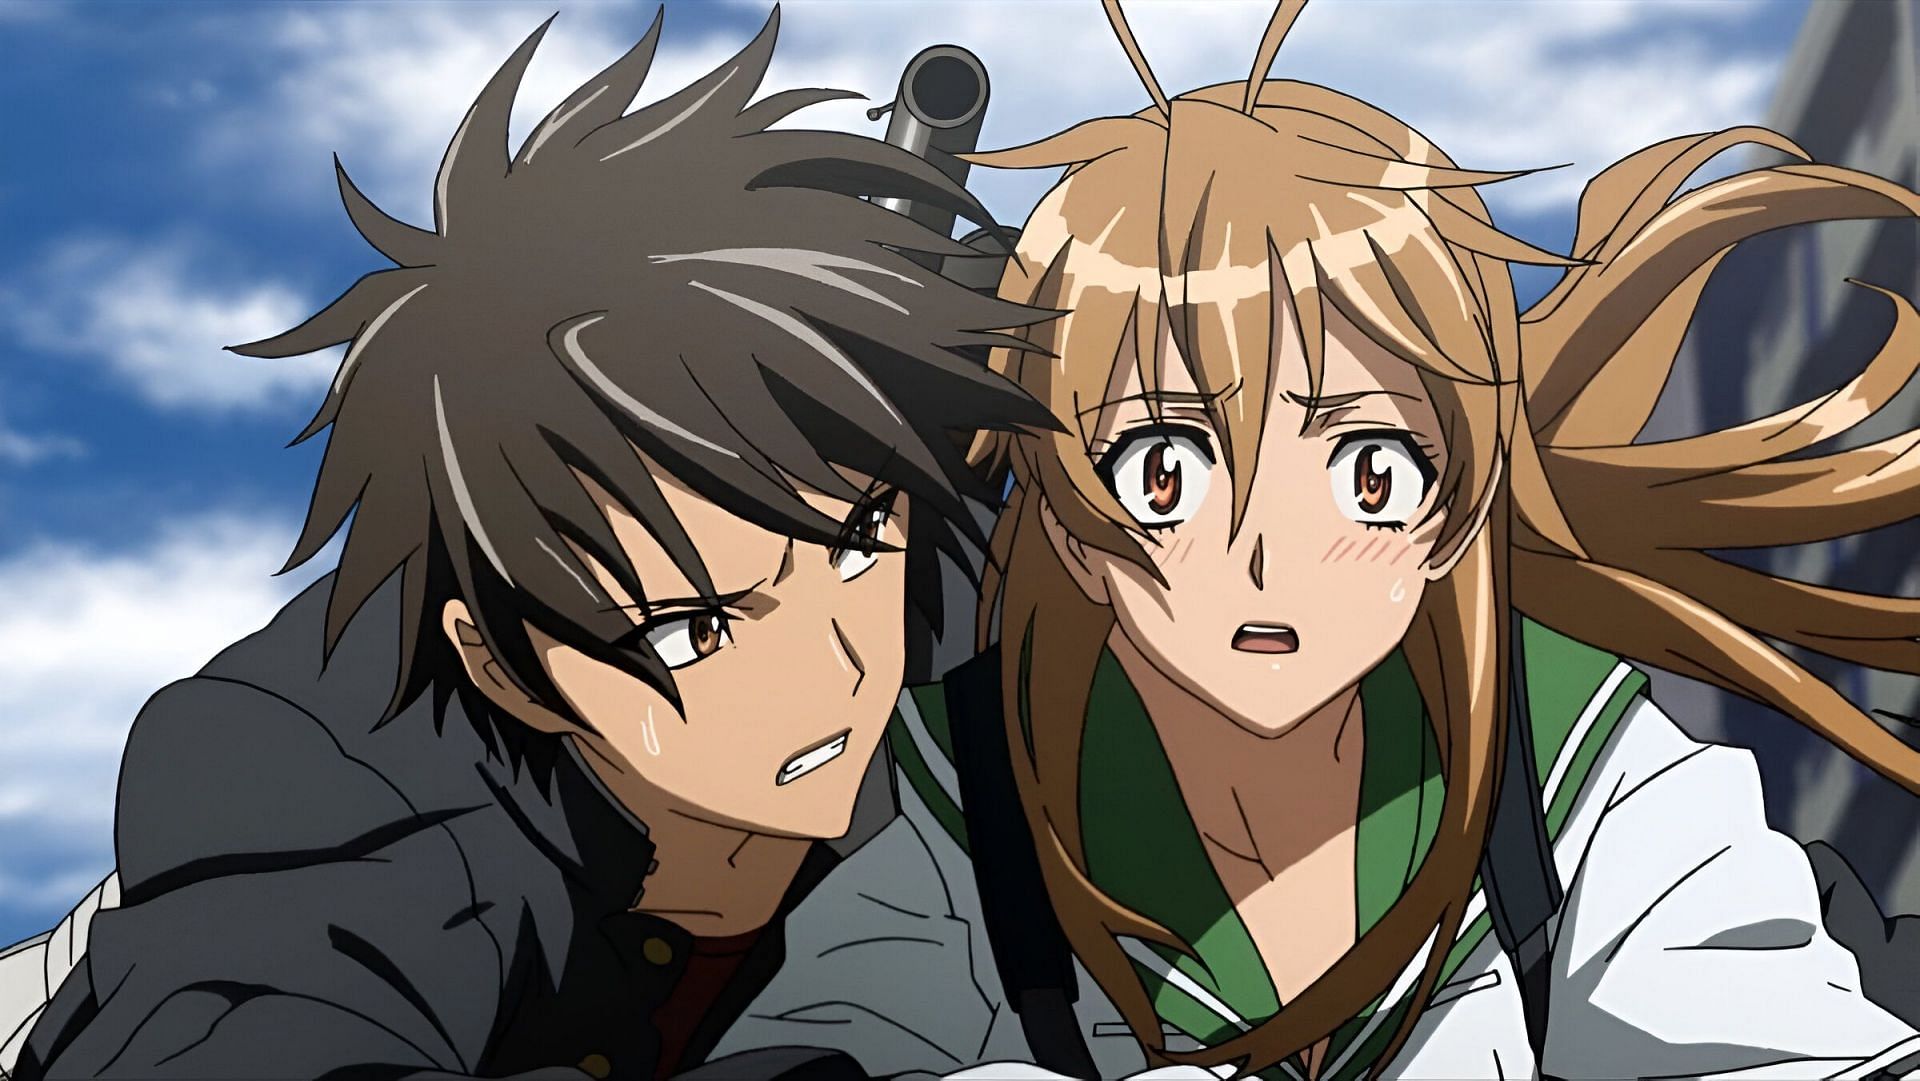 Takeshi (right) and Rei (left) as seen in the anime (Image via Madhouse)